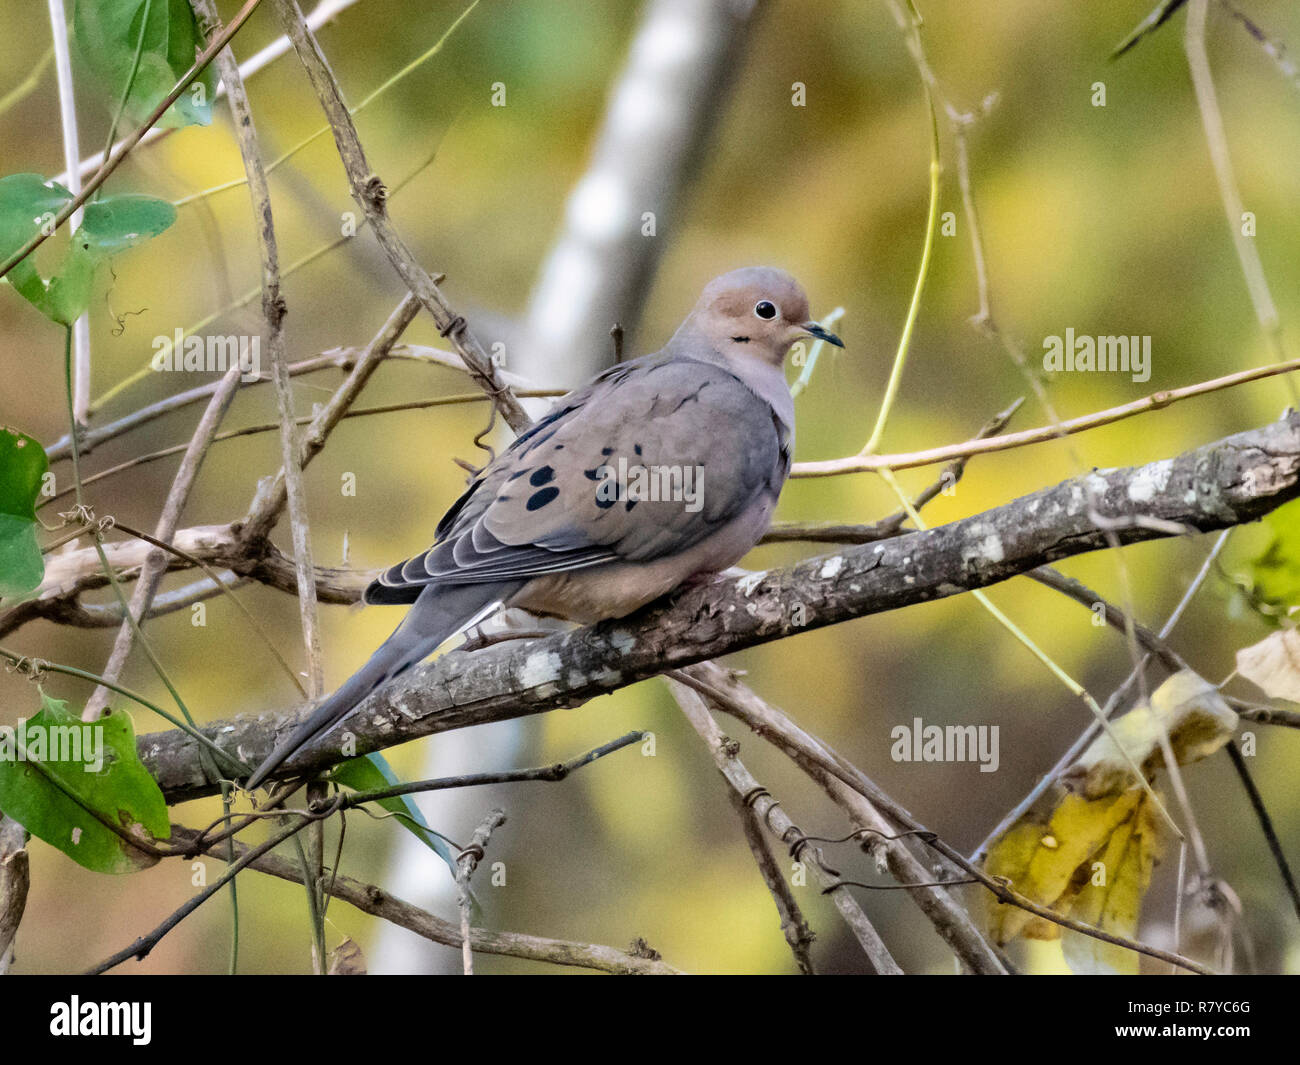 A mourning dove, Zenaida macroura, perches on a branch in the Red River